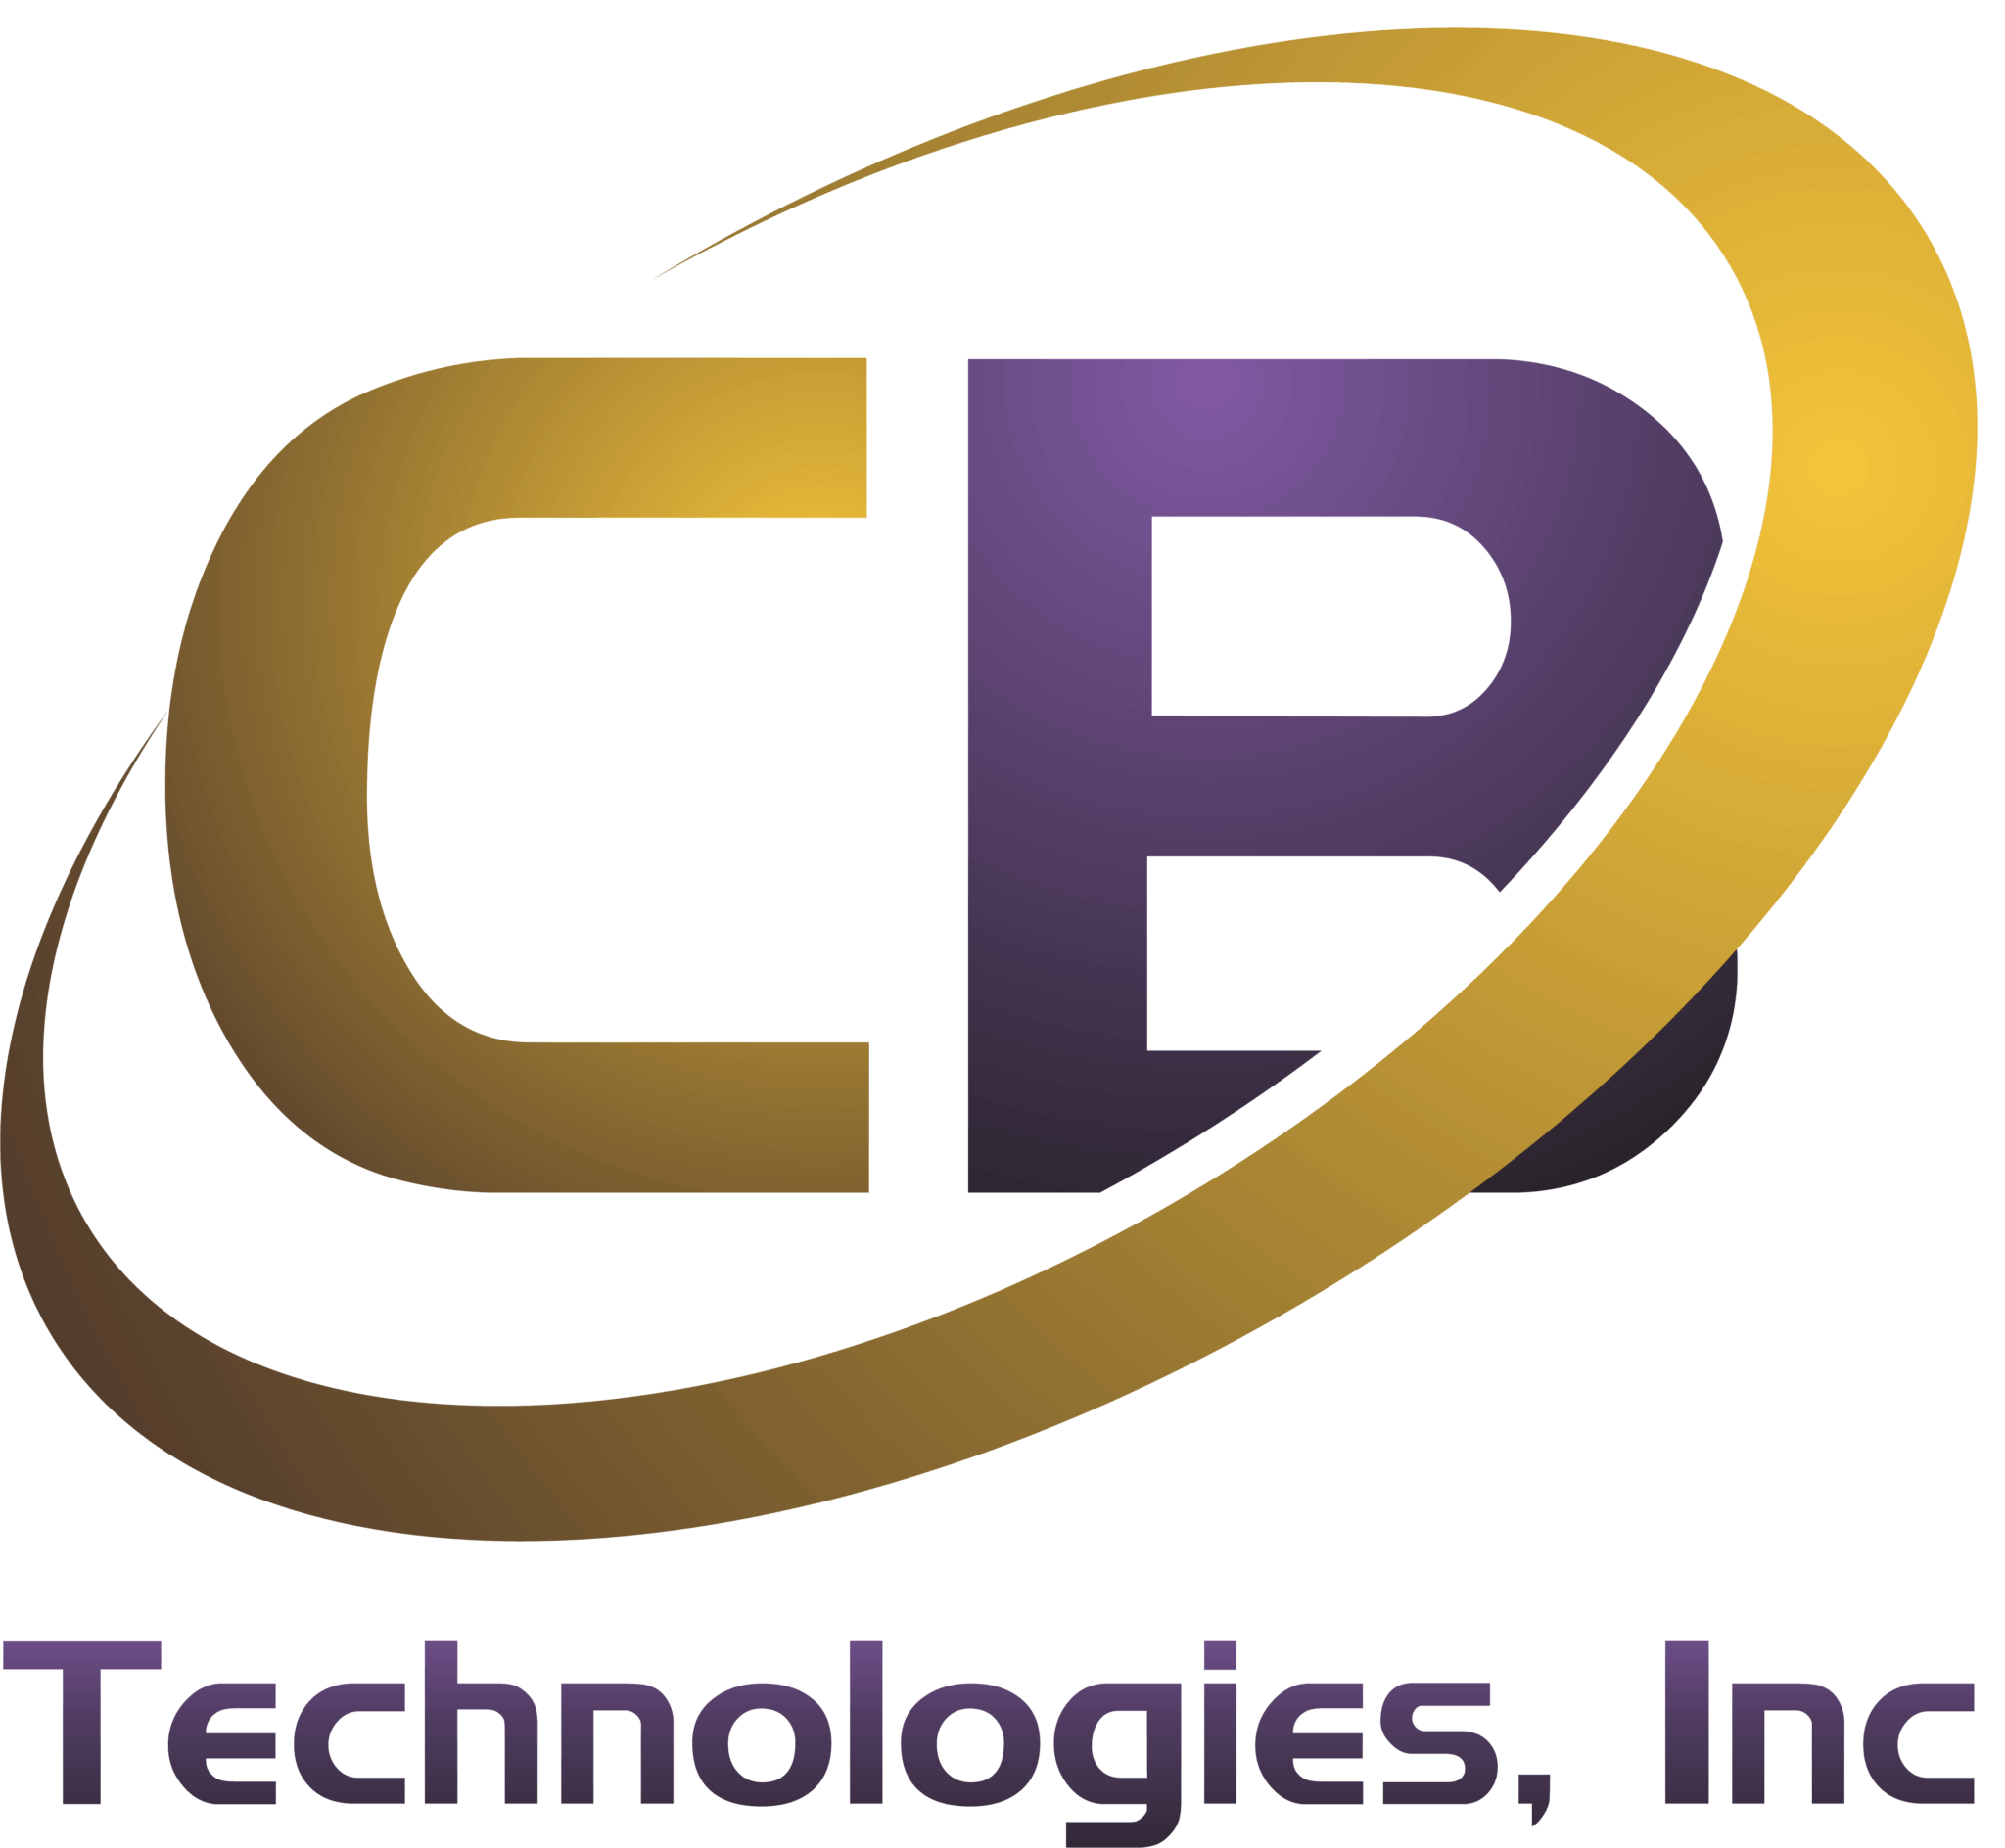 CB Logo - CB Technologies - Delivering Technology with a Human Touch